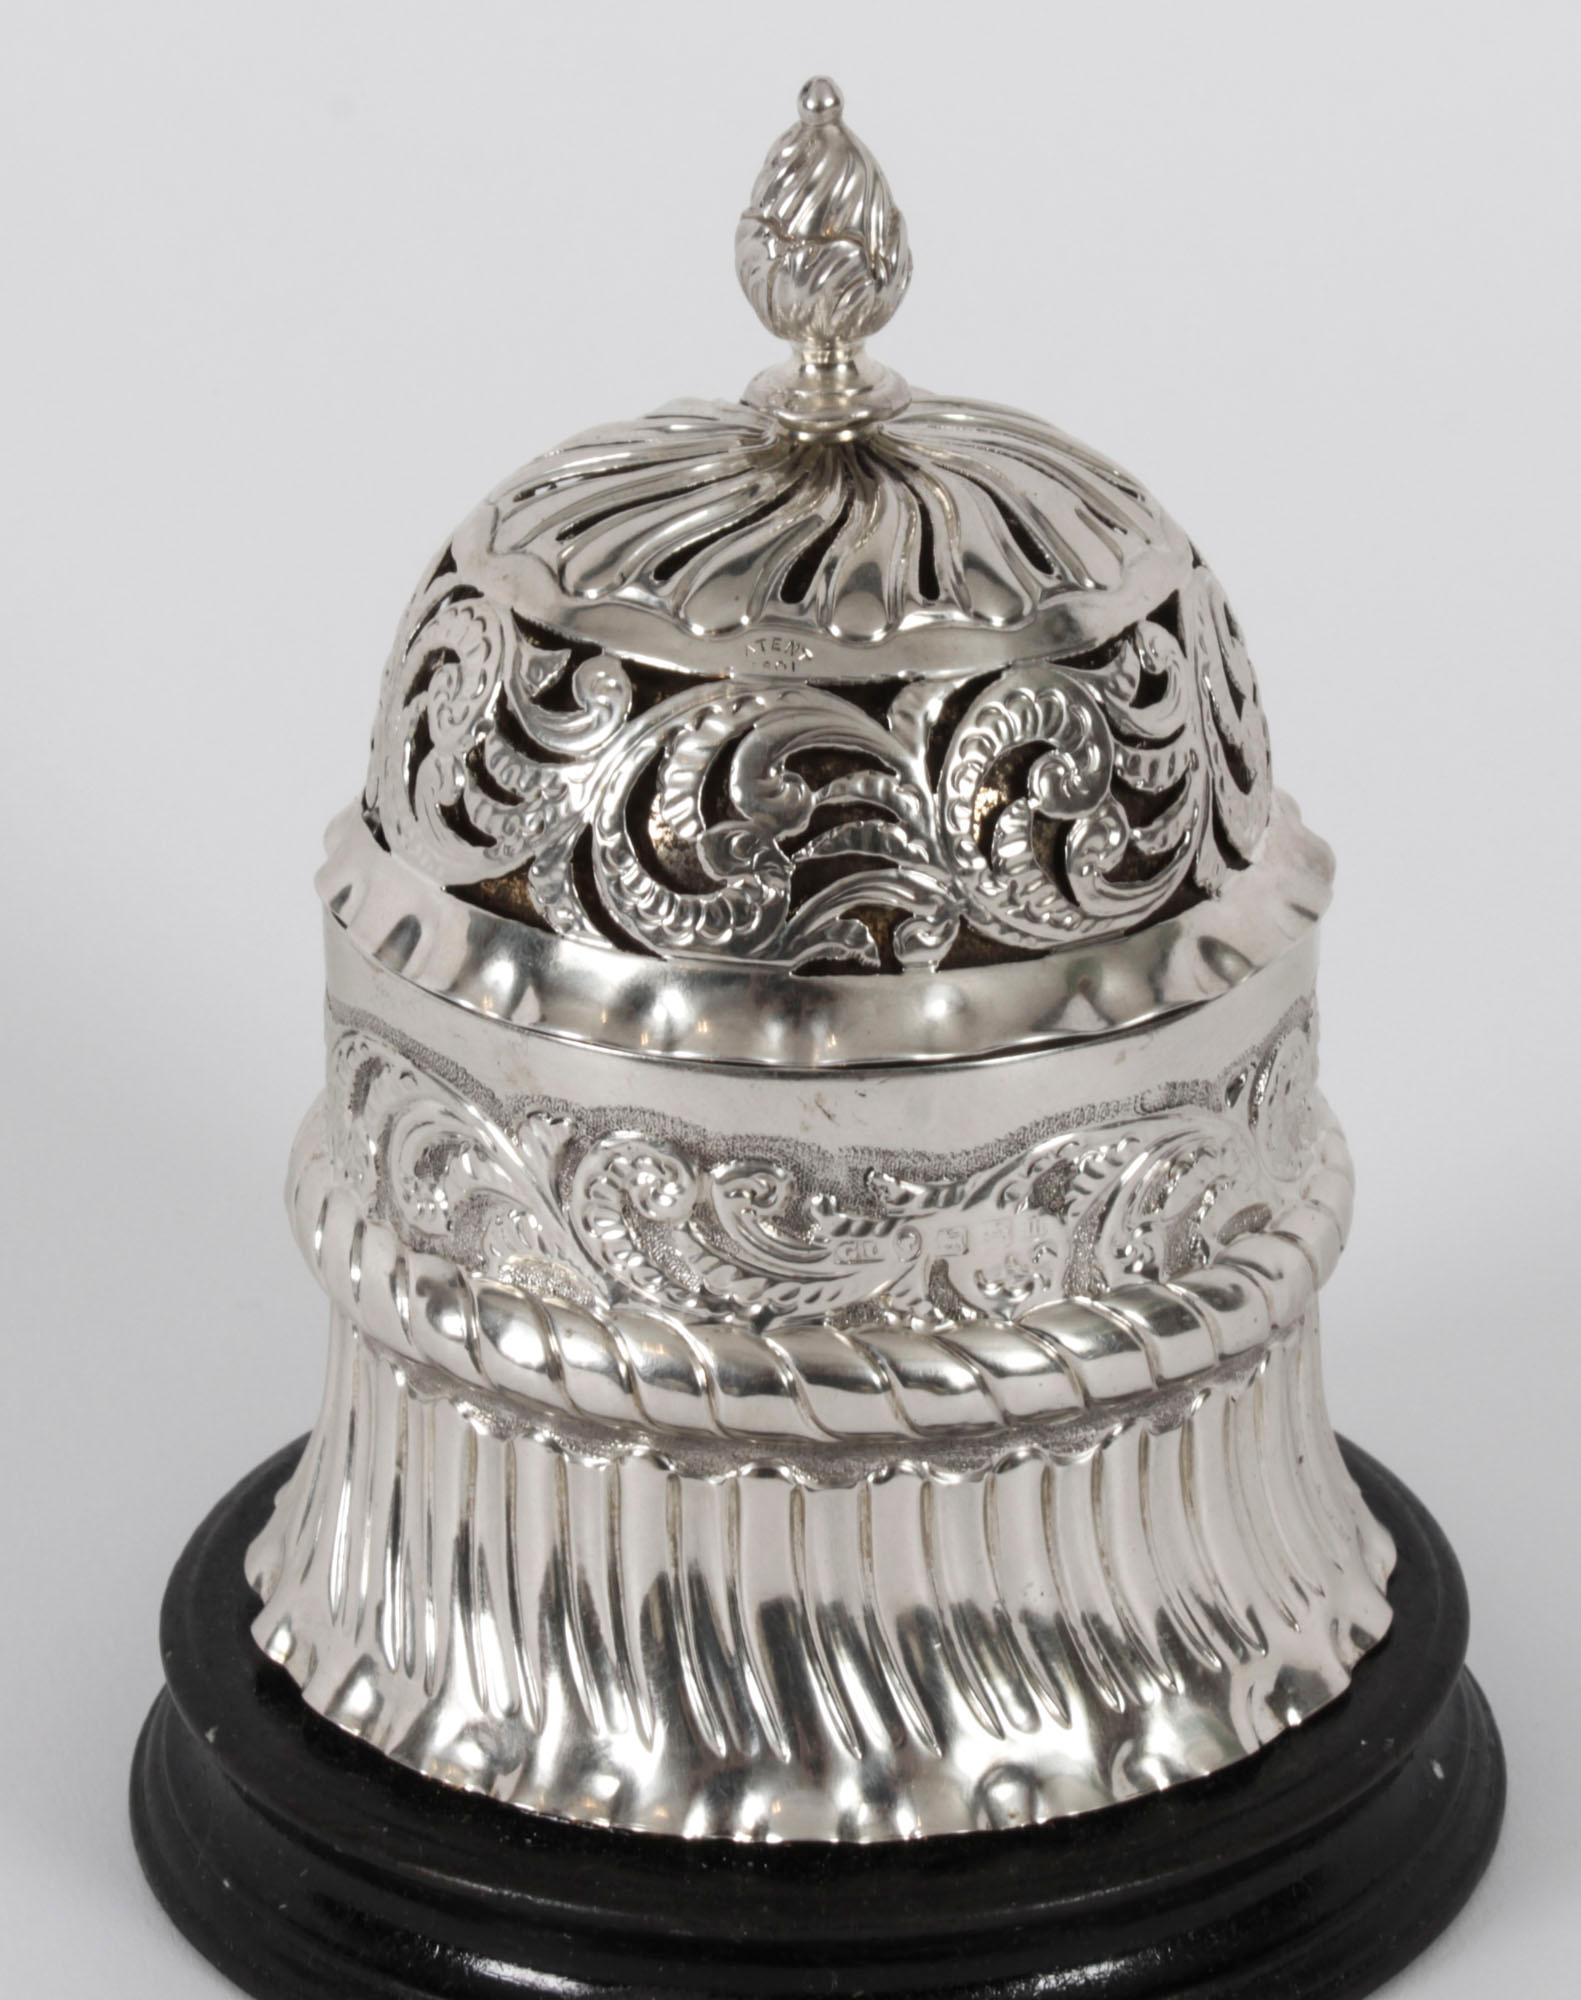 A delightful antique English Victorian sterling silver call bell, bearing the makers mark of the renowned silversmith George Unite and hallmarks for Birmingham 1888 and Patent 801.

Of domed circular form with pierced and repoussé foliate